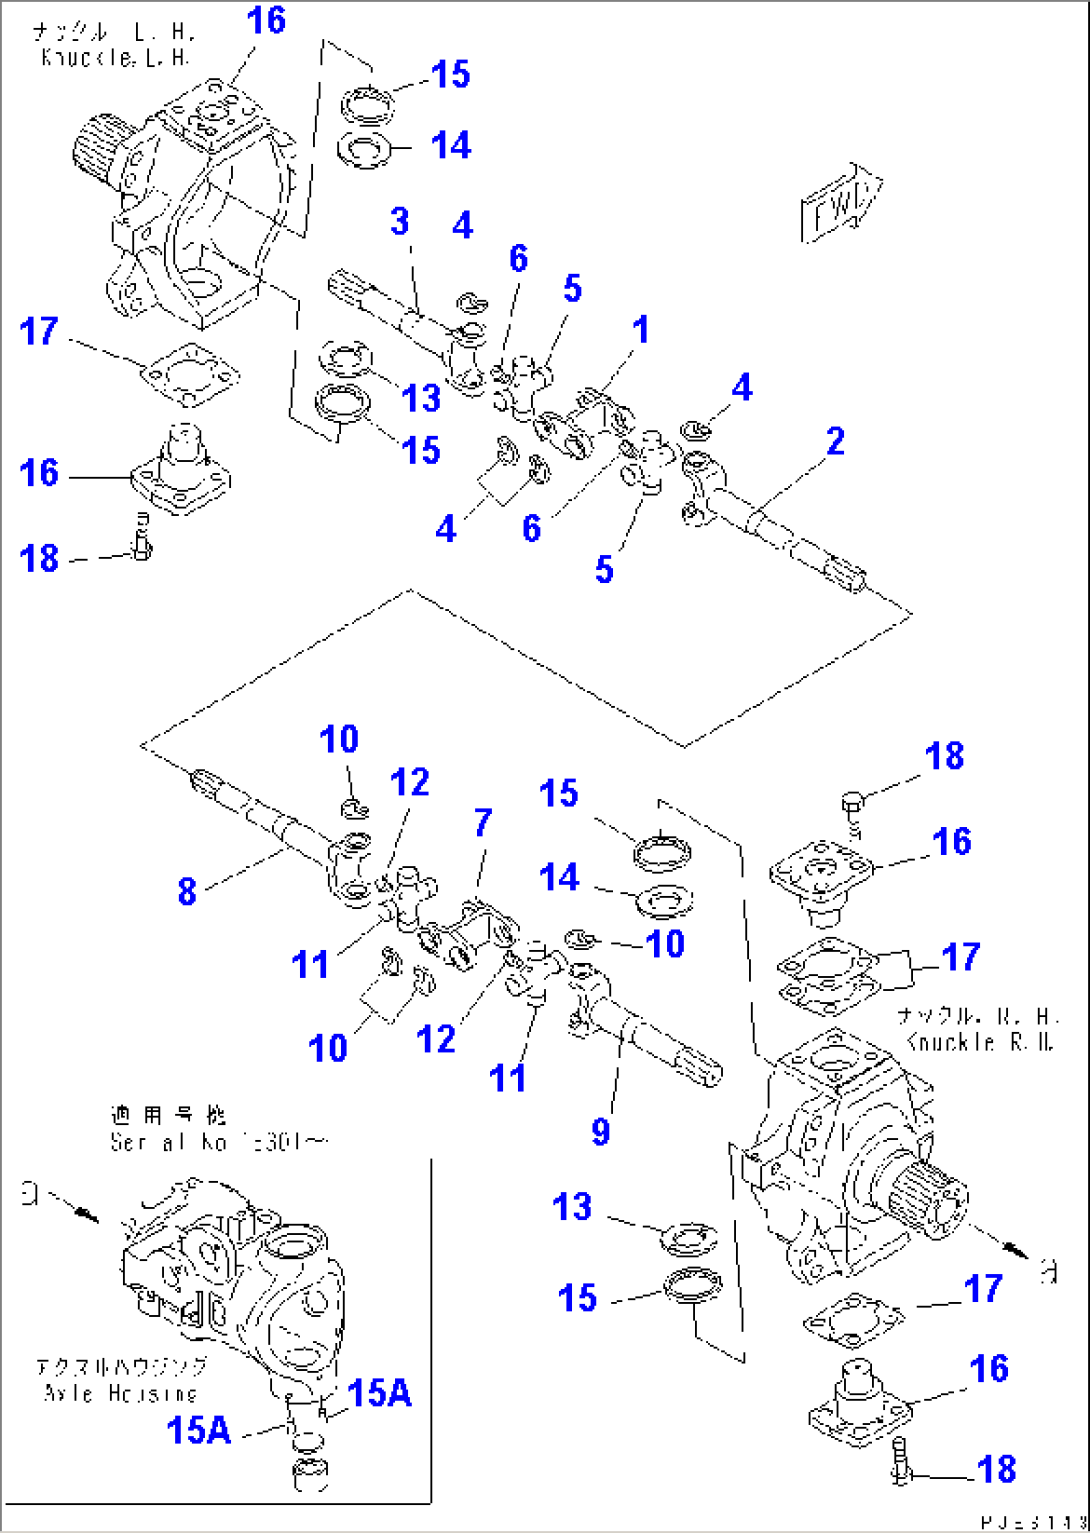 FRONT AXLE (UNIVESAL JOINT)(#15001-.)